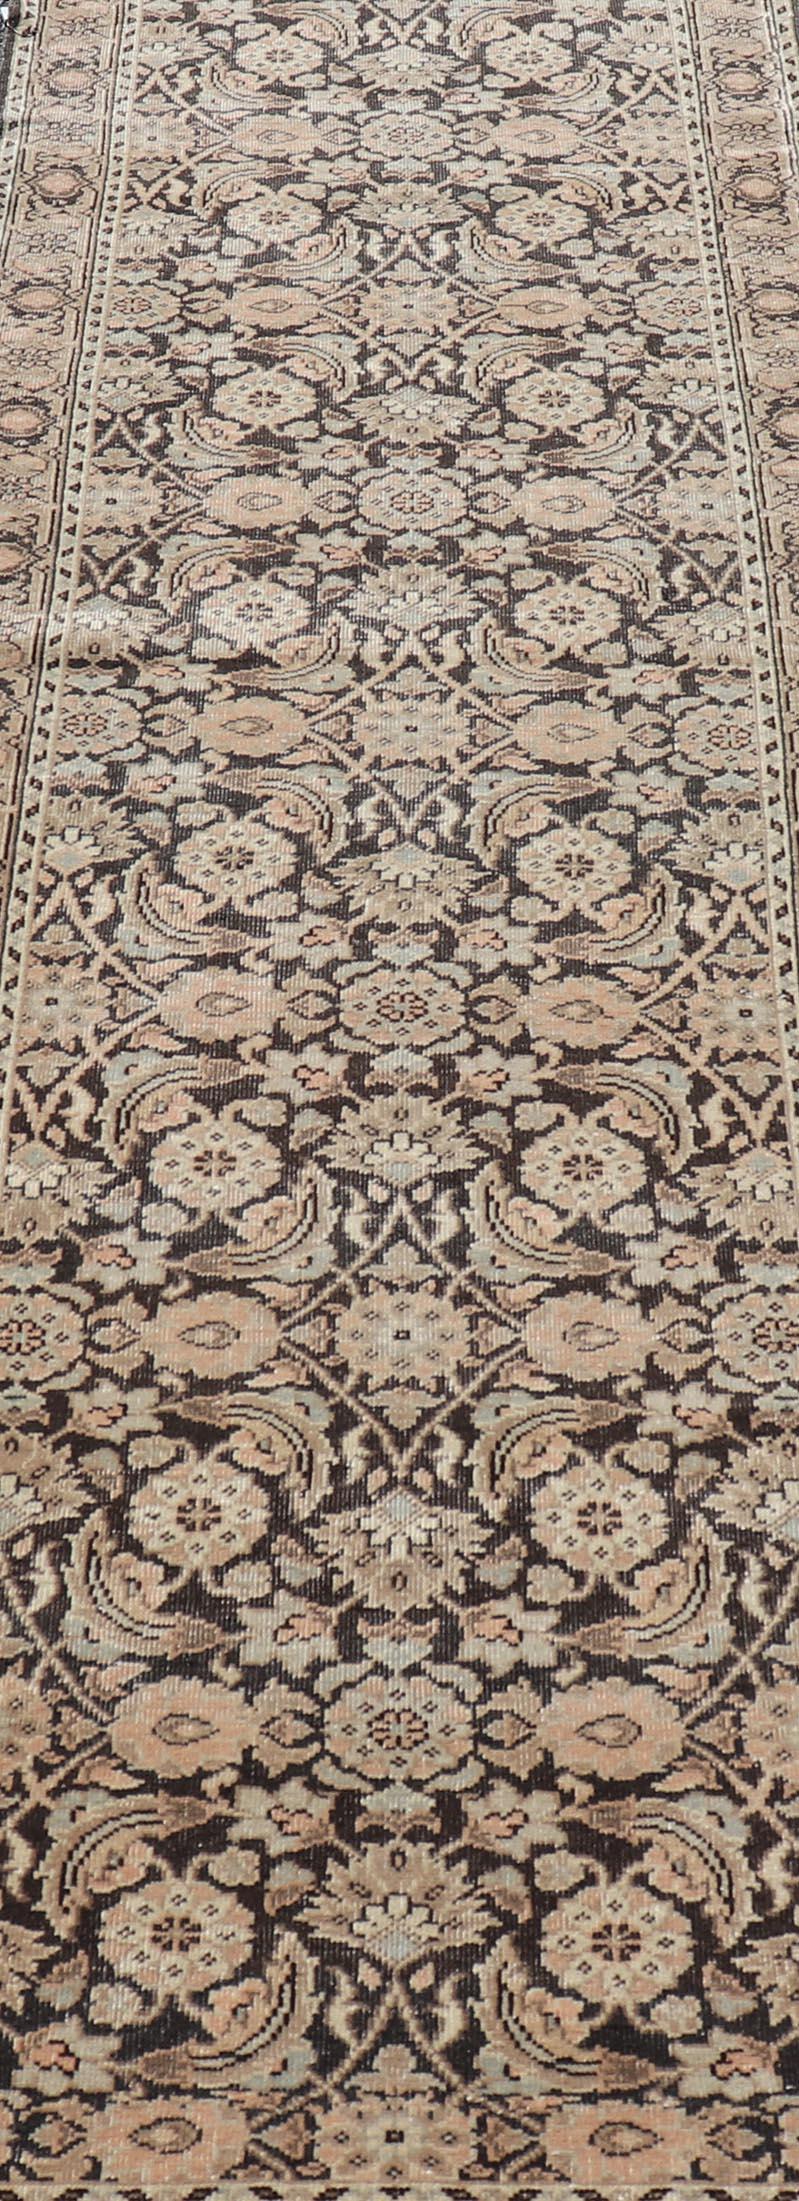 Antique Persian Tabriz Runner with Ornate Floral Design in Earthy Tones  For Sale 2